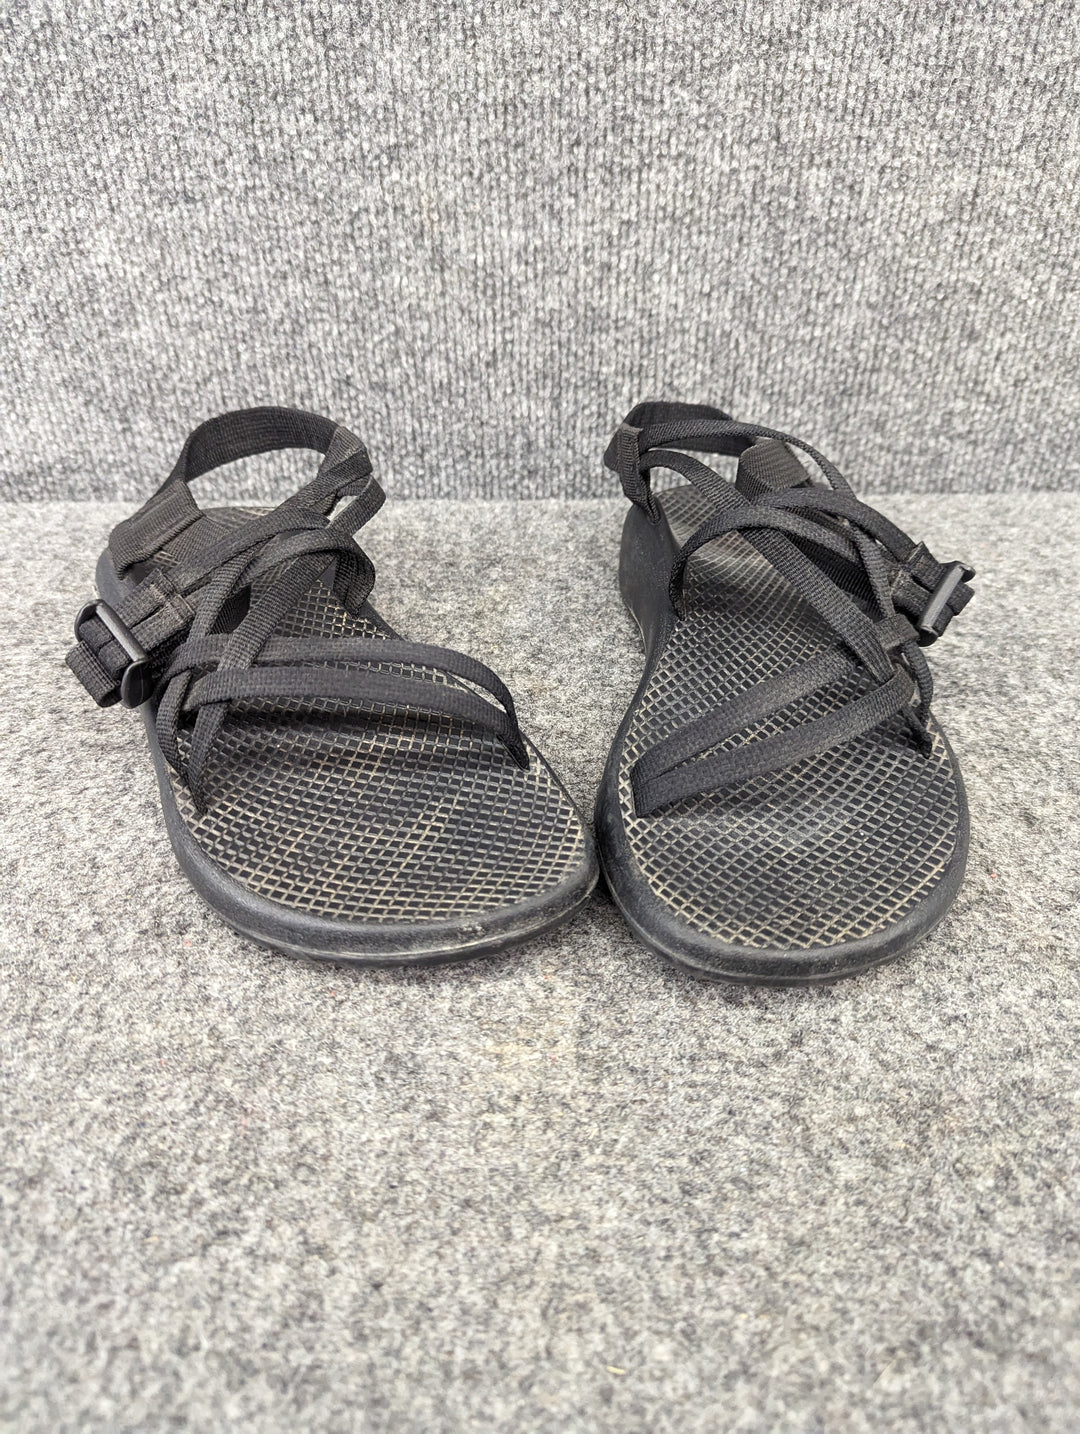 Chaco Size 9/42 Women's Sandals